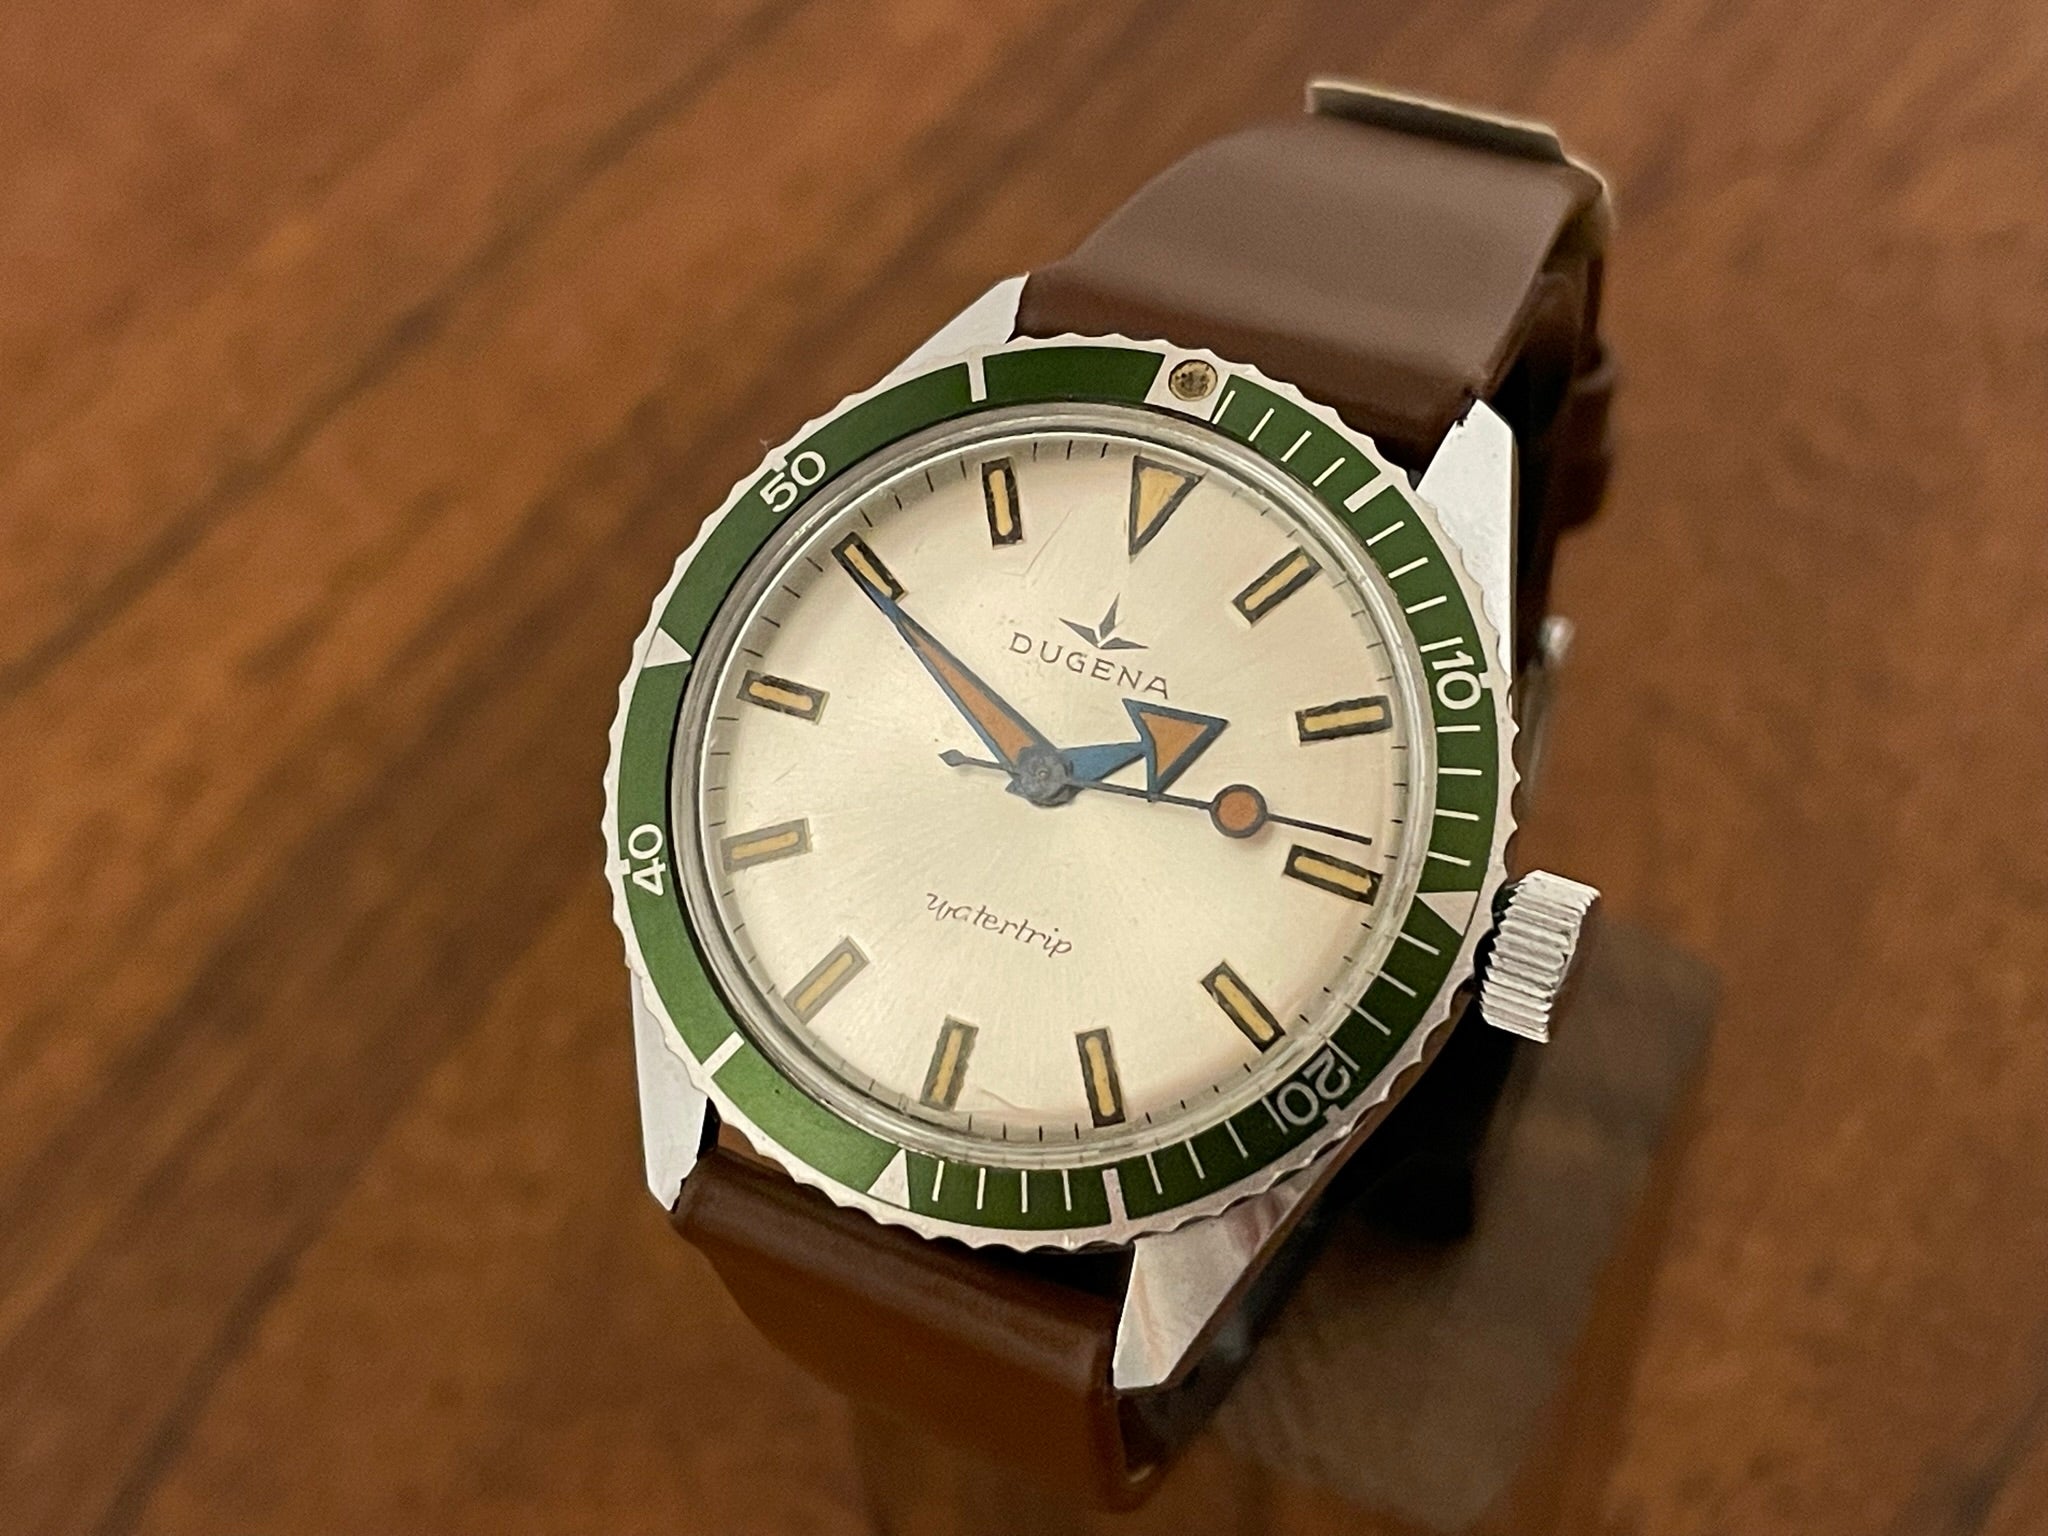 Dugena Solid gold 14k for $950 for sale from a Private Seller on Chrono24